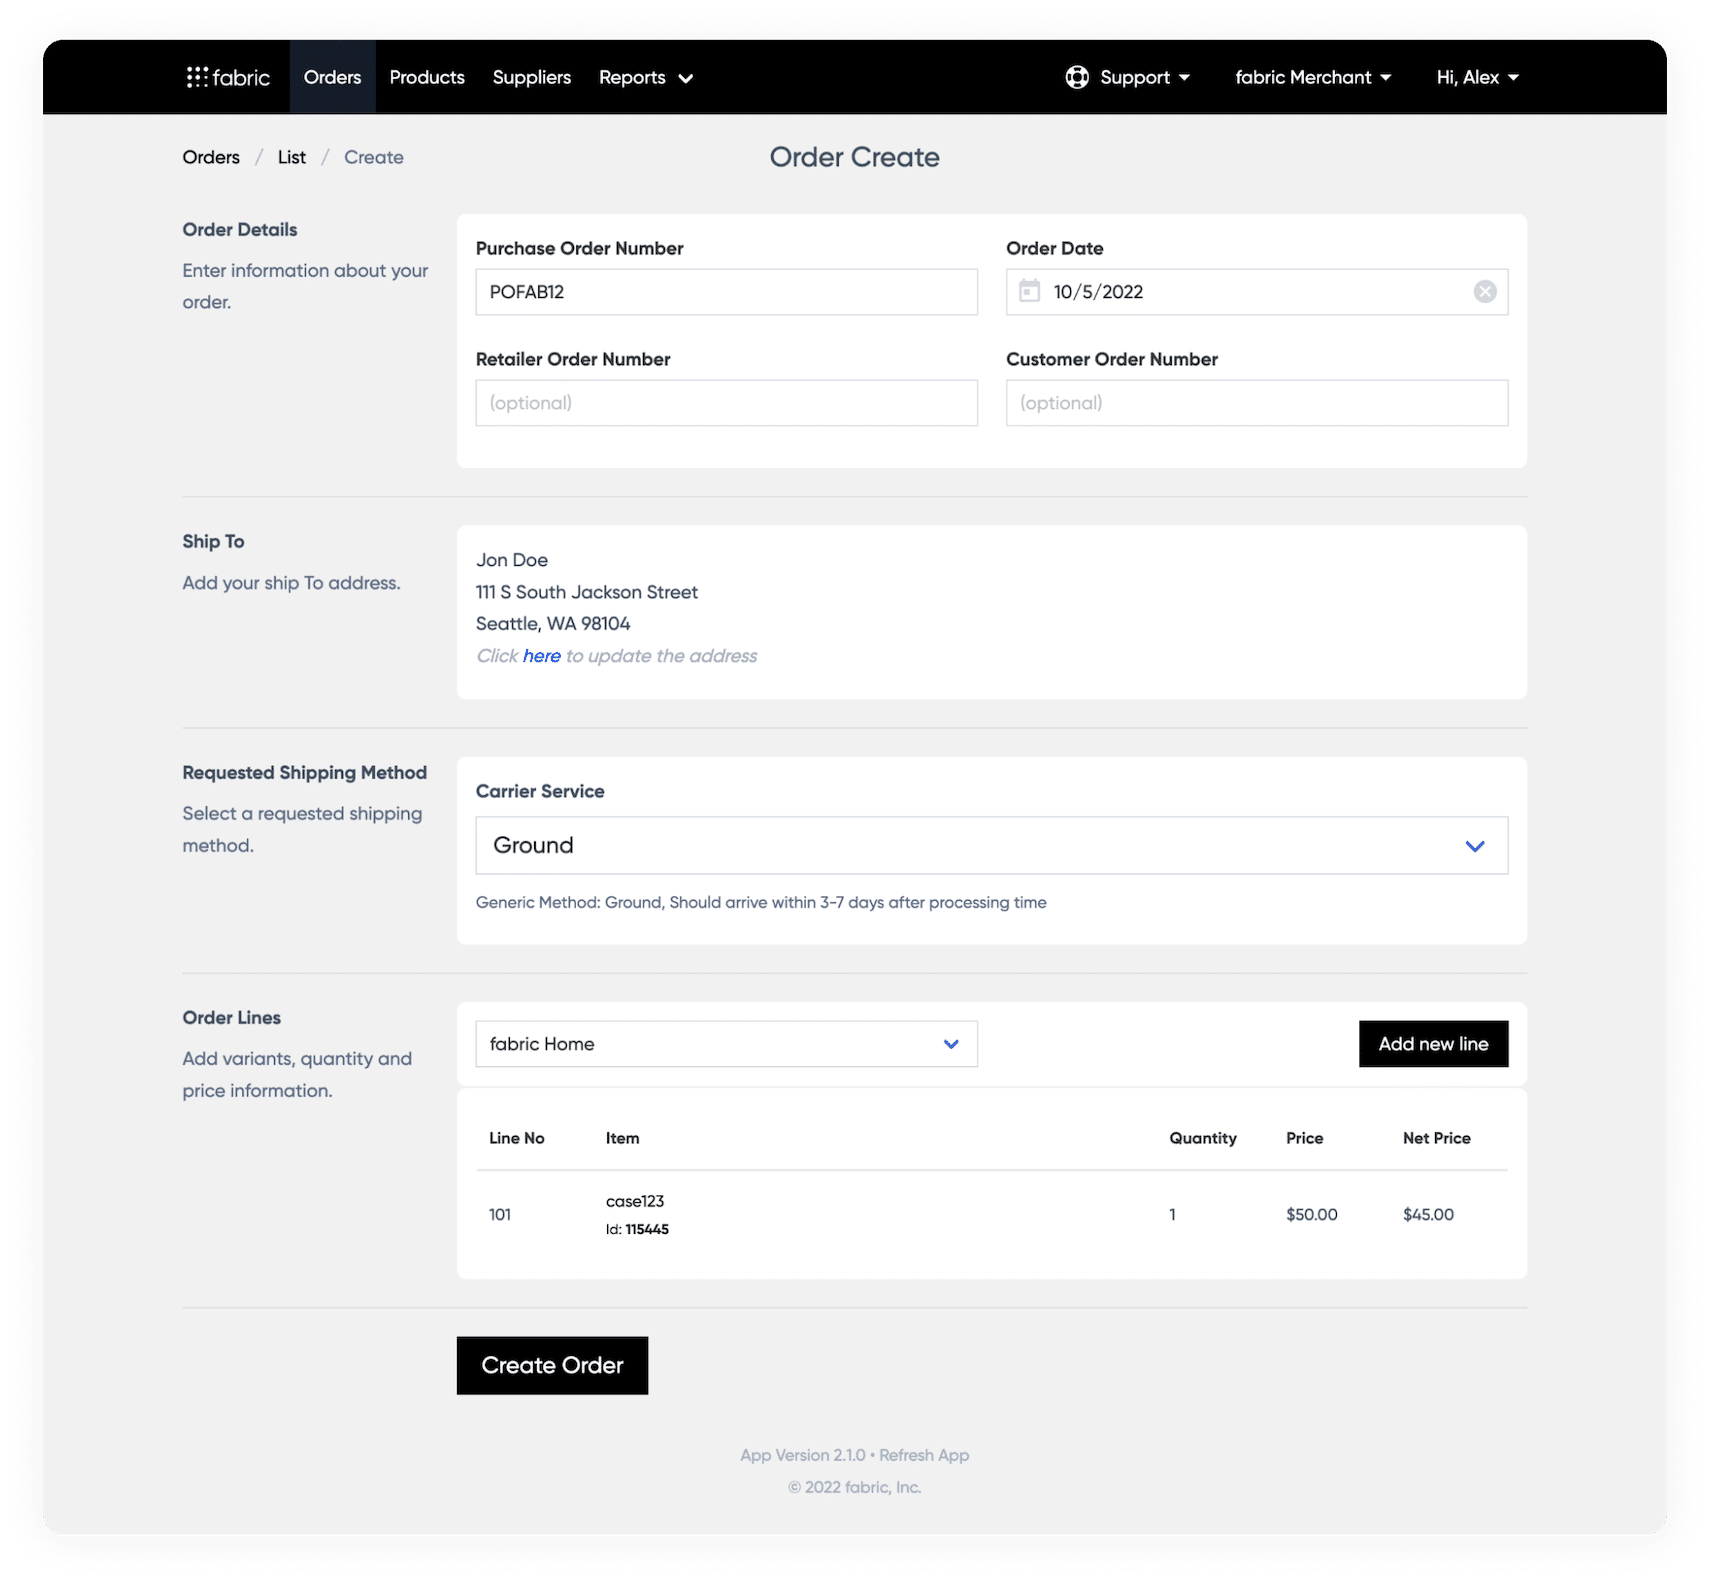 With our product release, it's easier than ever to create manual purchase orders in fabric Marketplace.